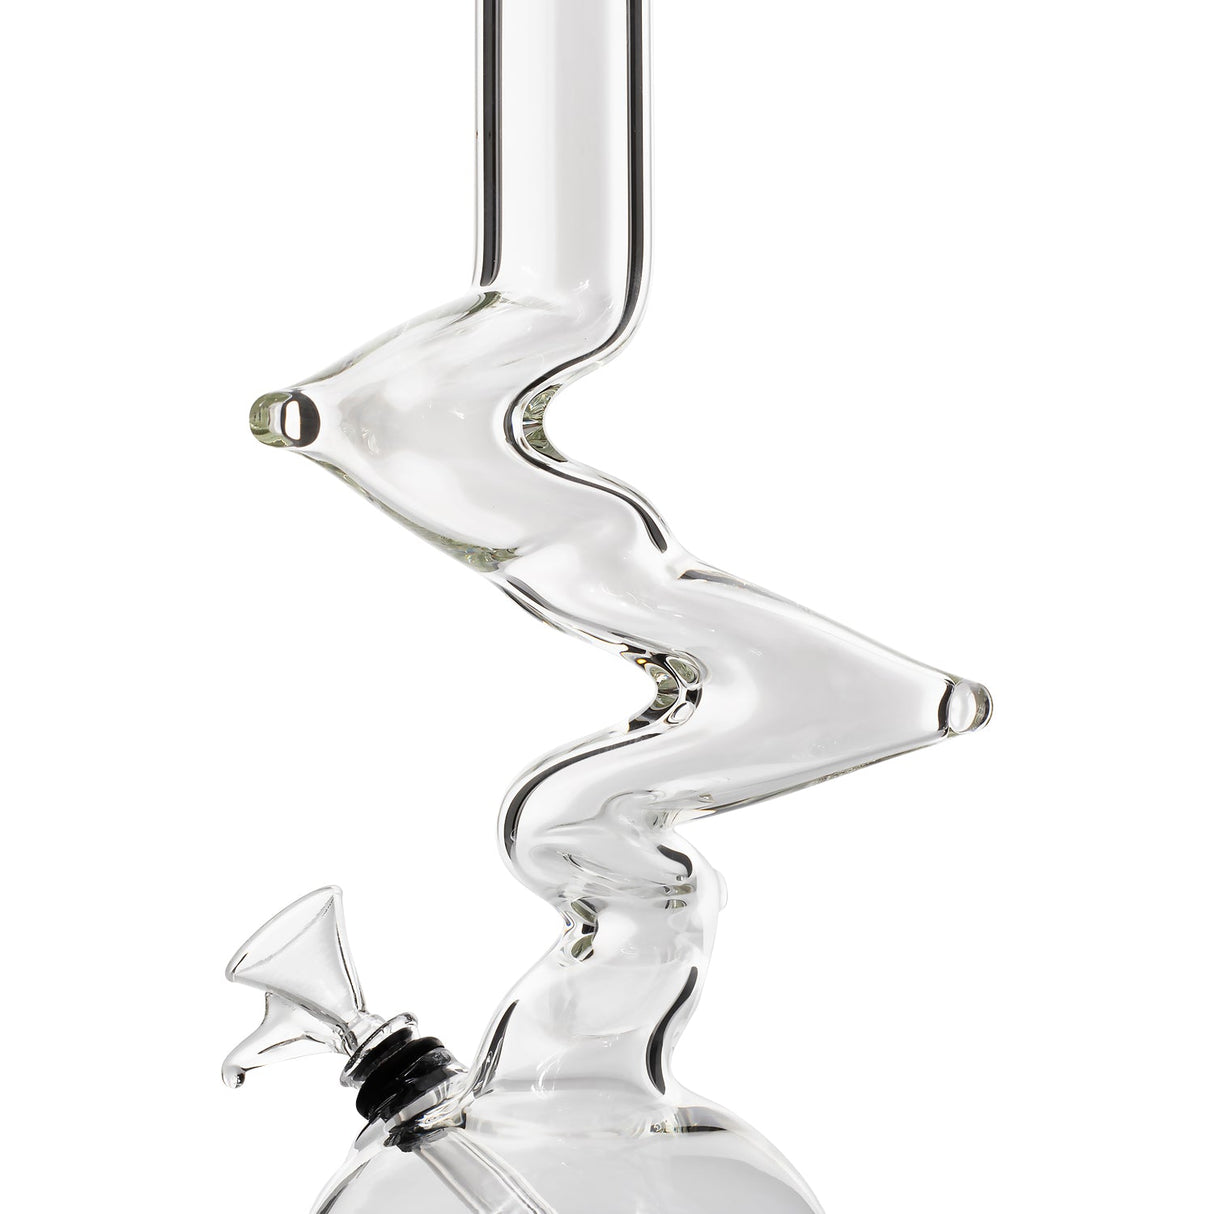 LA Pipes "Jacobs Ladder" Clear Zong Bong with unique zigzag design and rubber grommet joint, side view